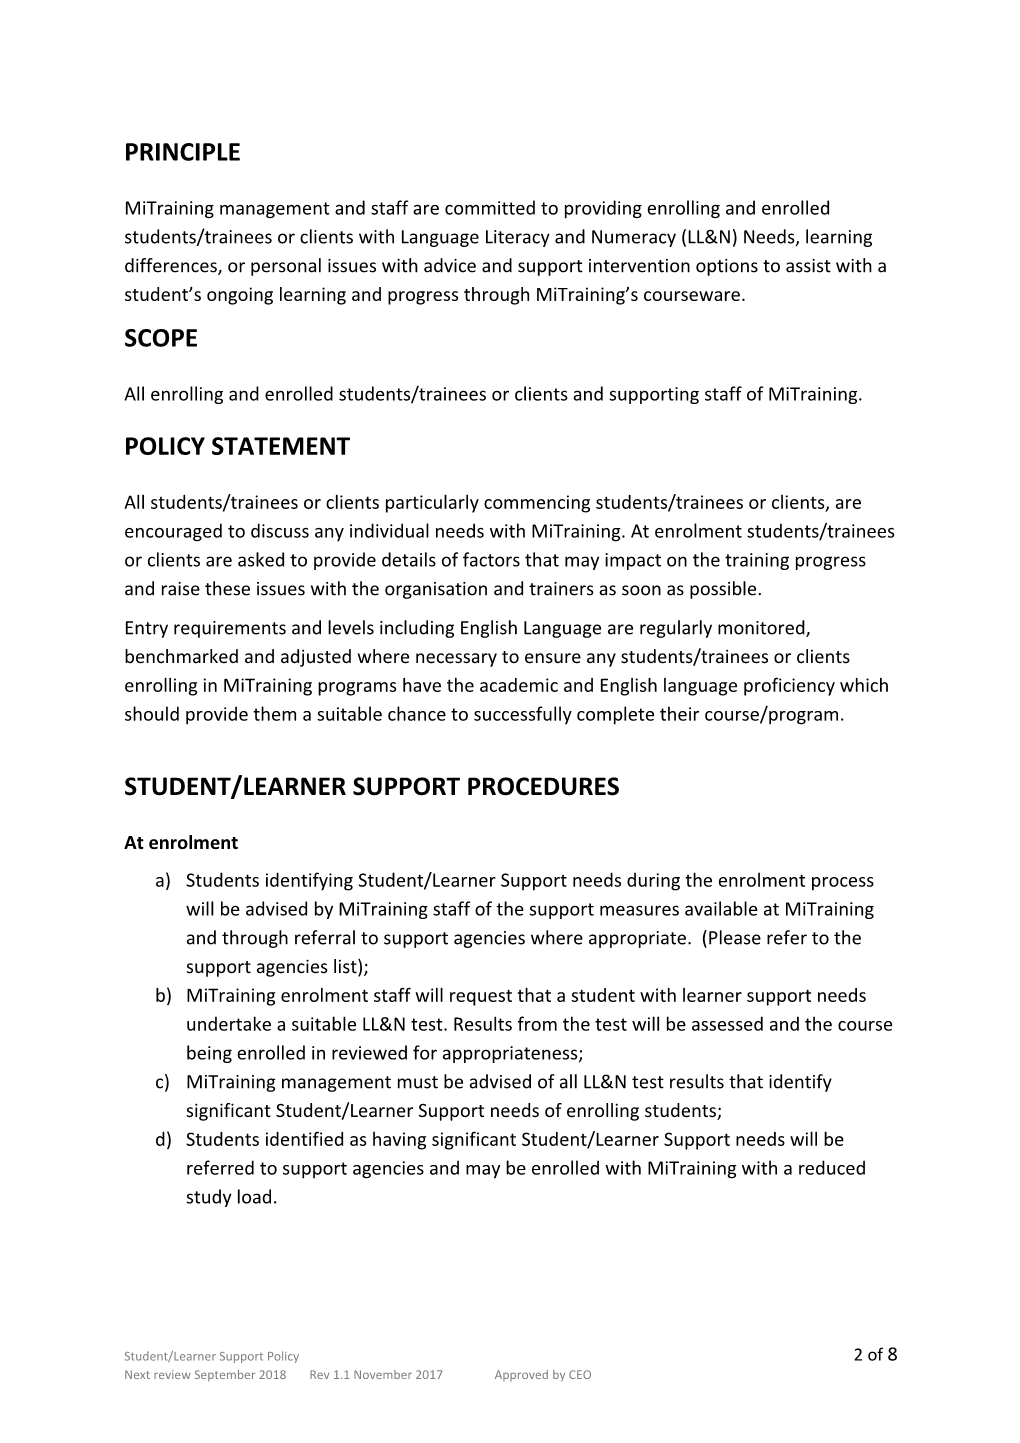 Student/Learner Support Policy and Procedure